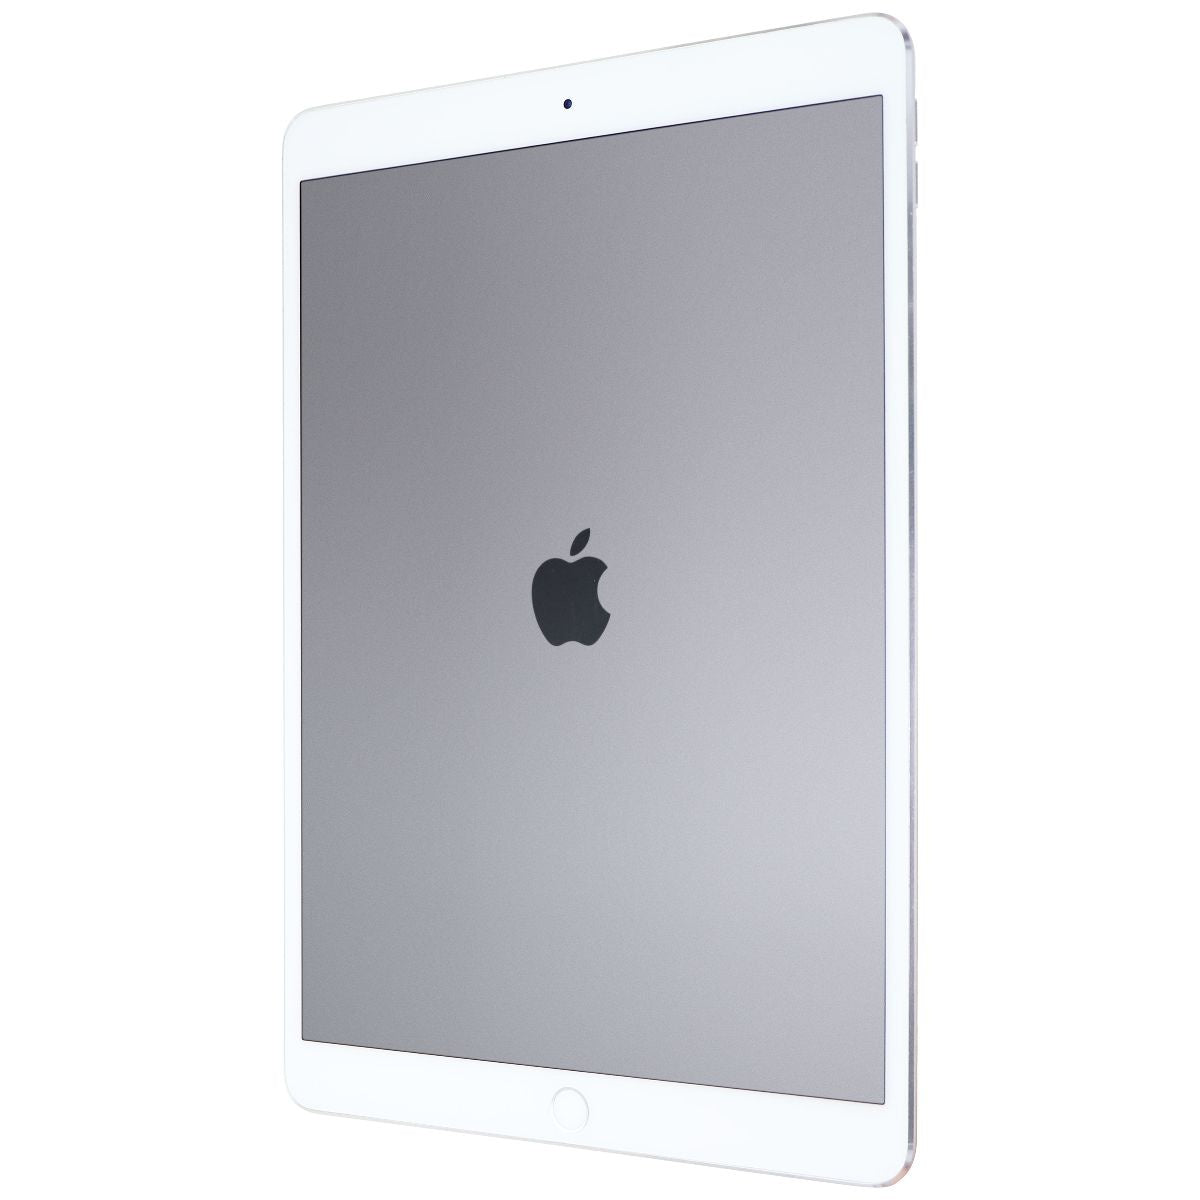 Apple iPad Pro (10.5-inch) Tablet (A1701) Wi-Fi Only - 64GB/Silver (MQDW2LL/A) iPads, Tablets & eBook Readers Apple    - Simple Cell Bulk Wholesale Pricing - USA Seller